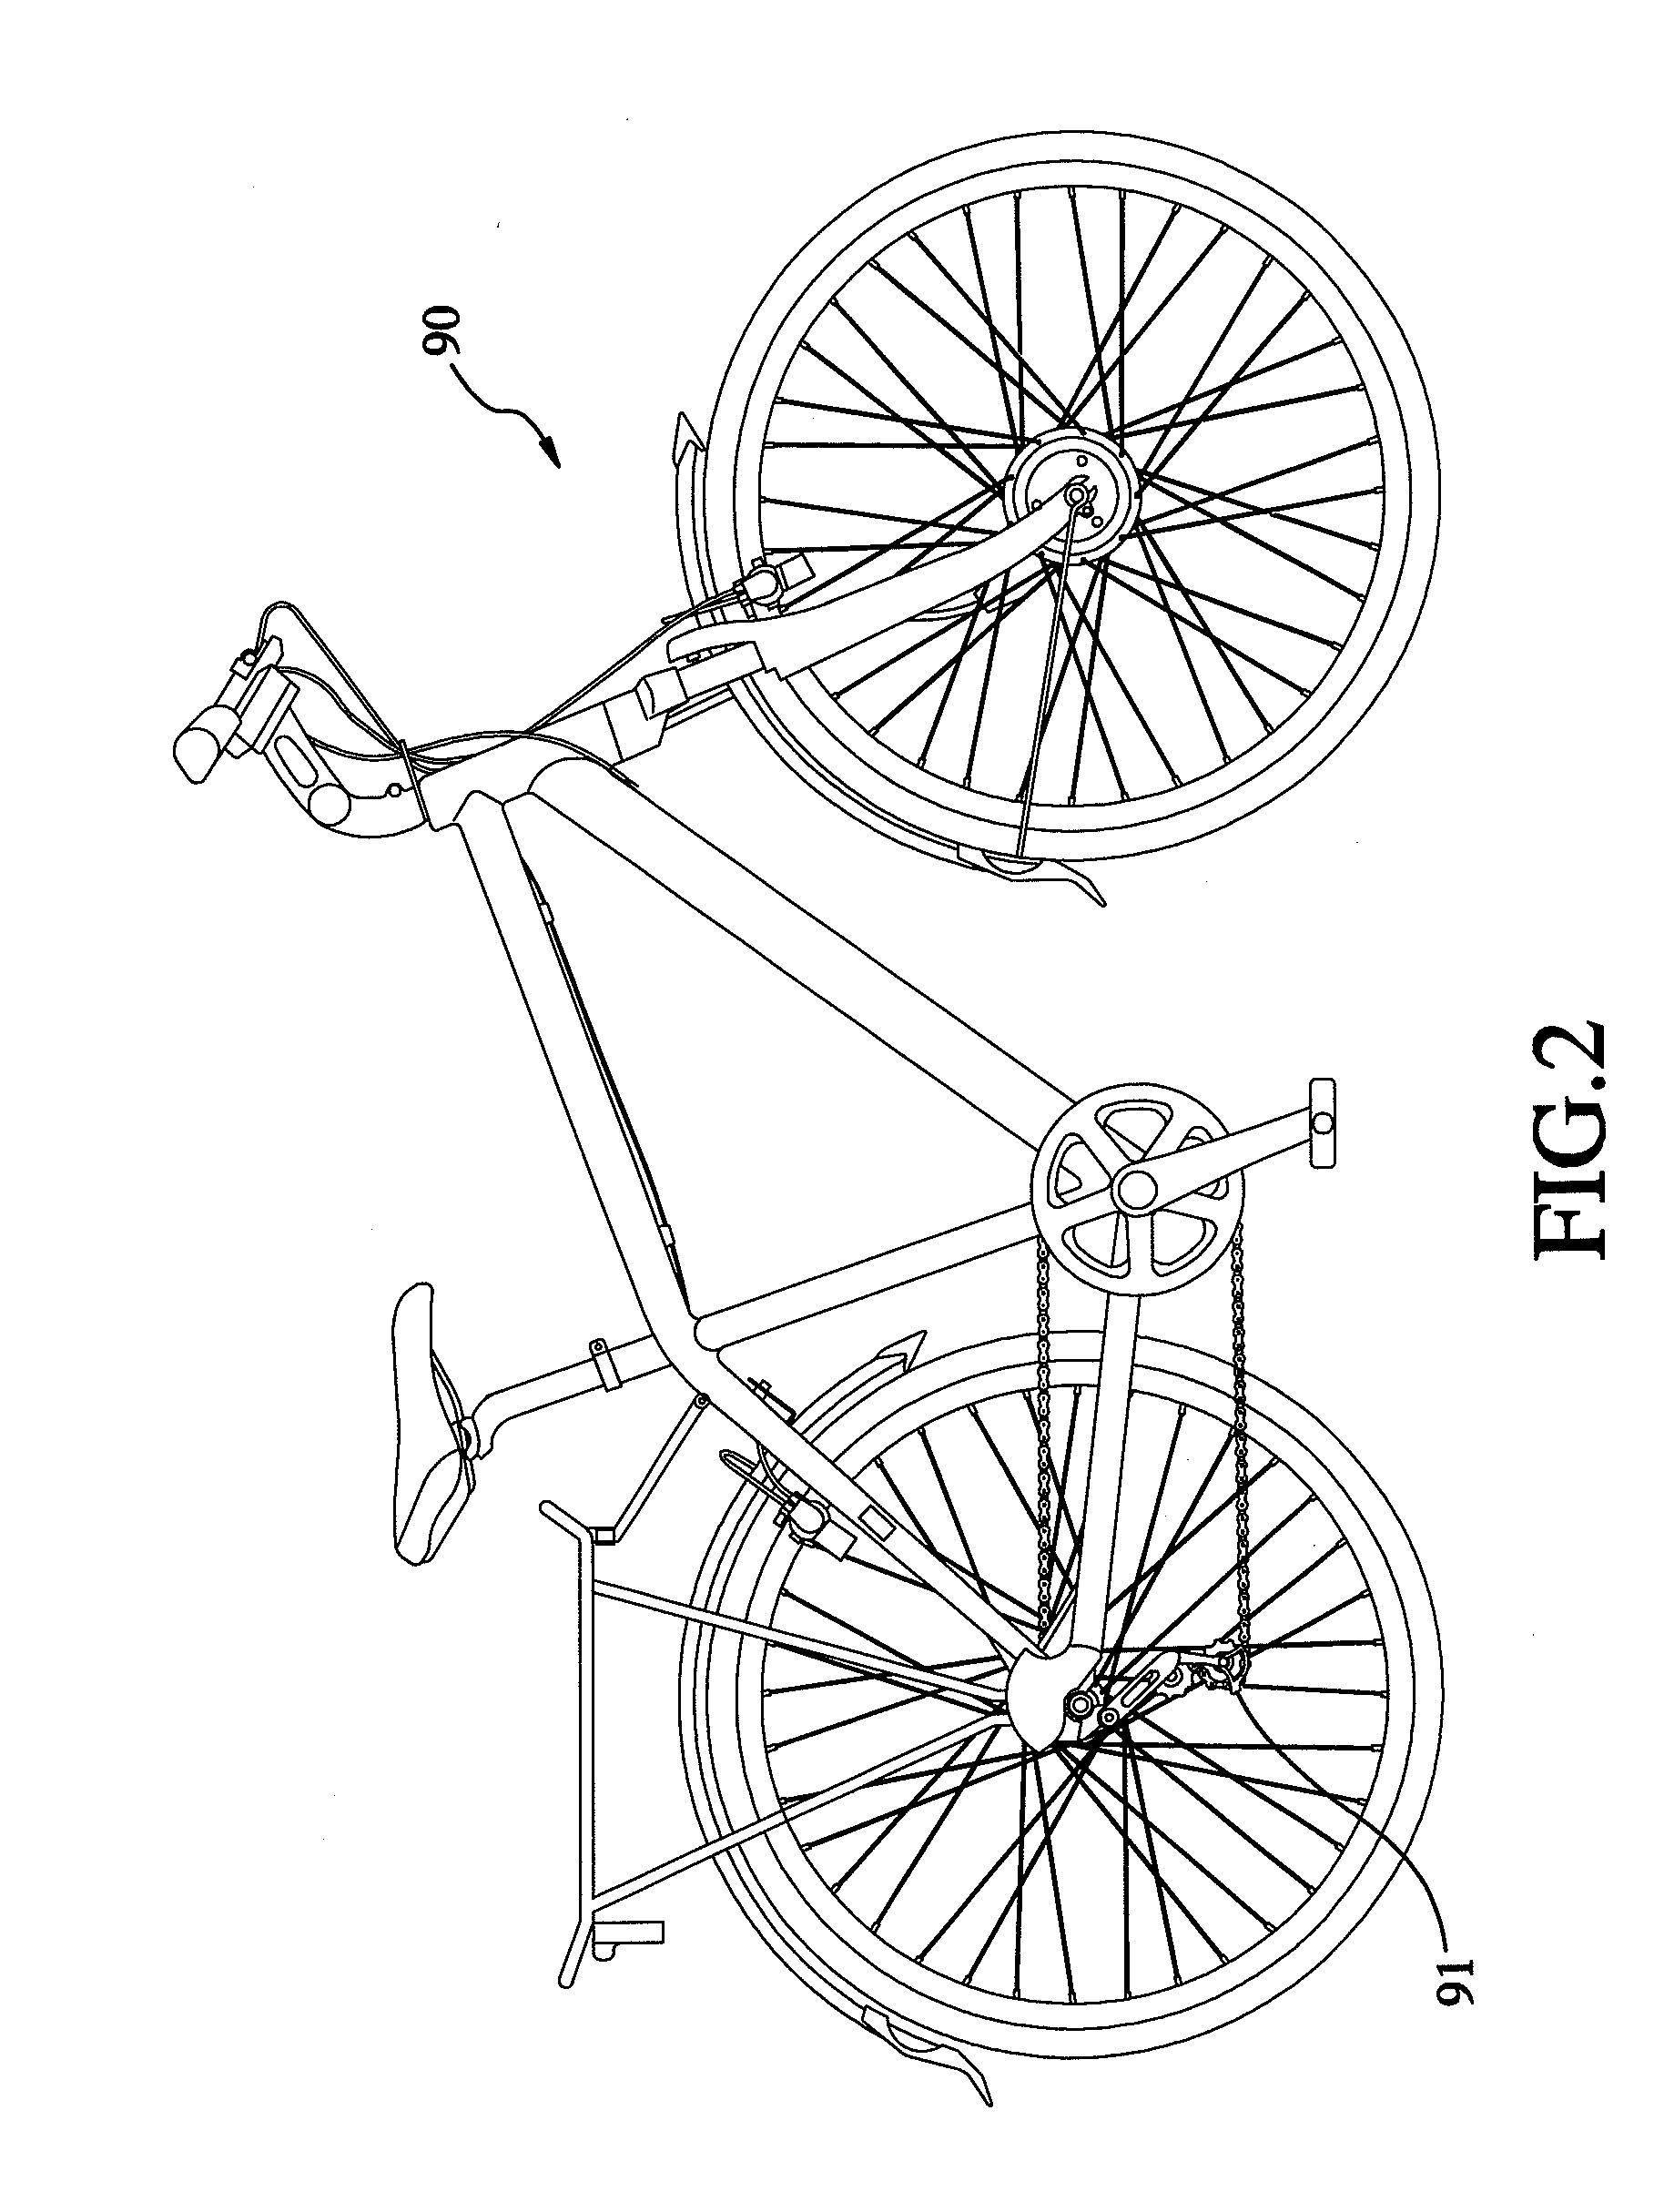 Bicycle gear shift control system capable of avoiding frequent gear shifting